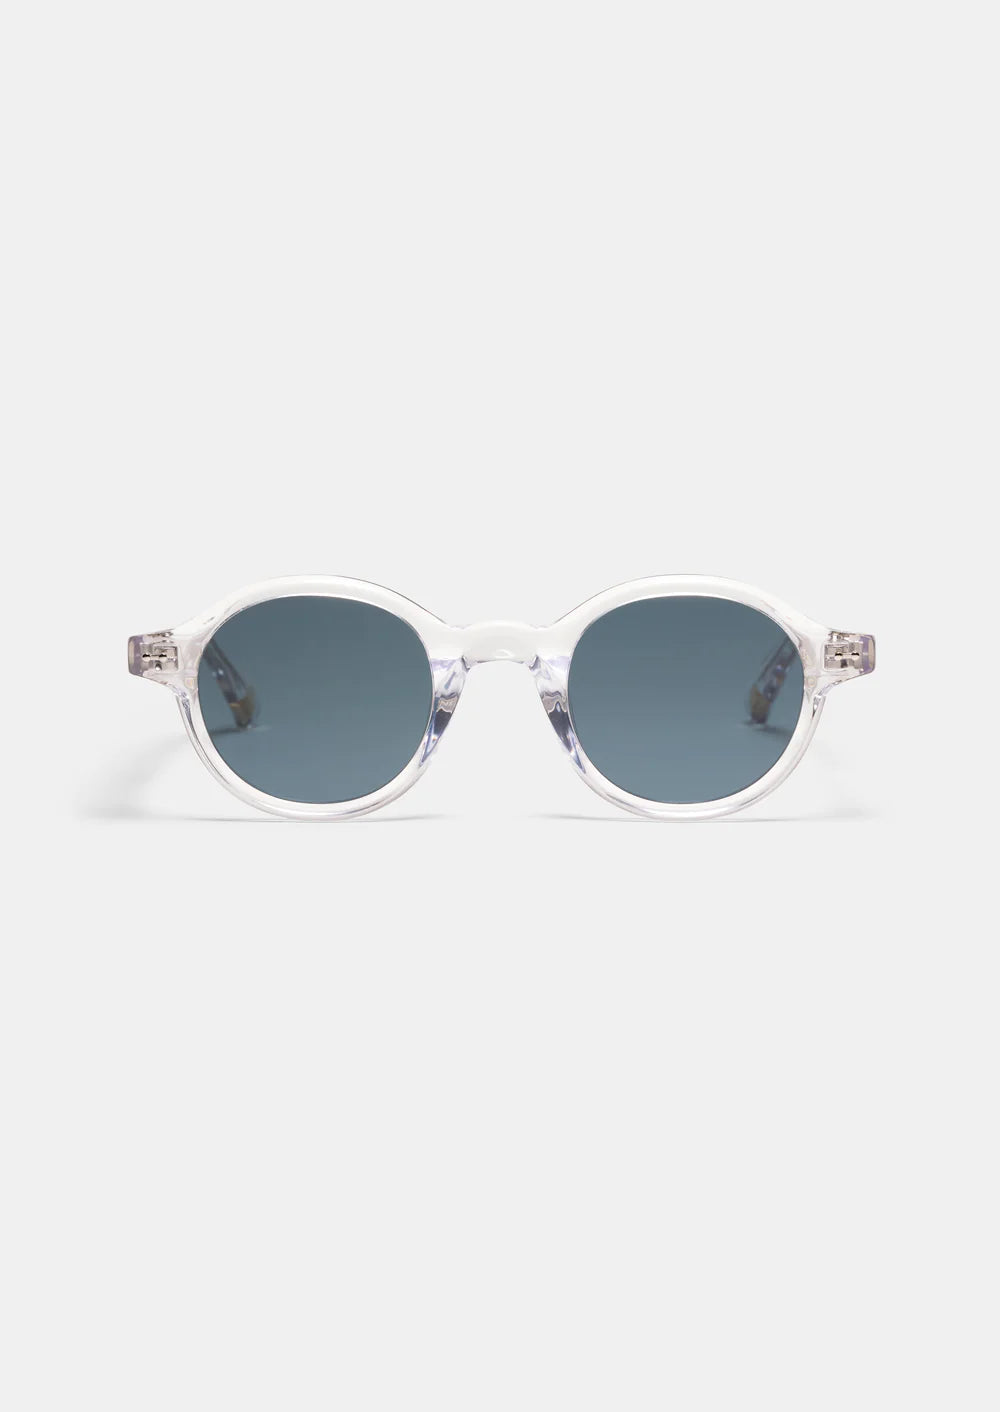 Lunette de soleil Peter and May S117 MIMISA SUN CRYSTAL BLUE GREY